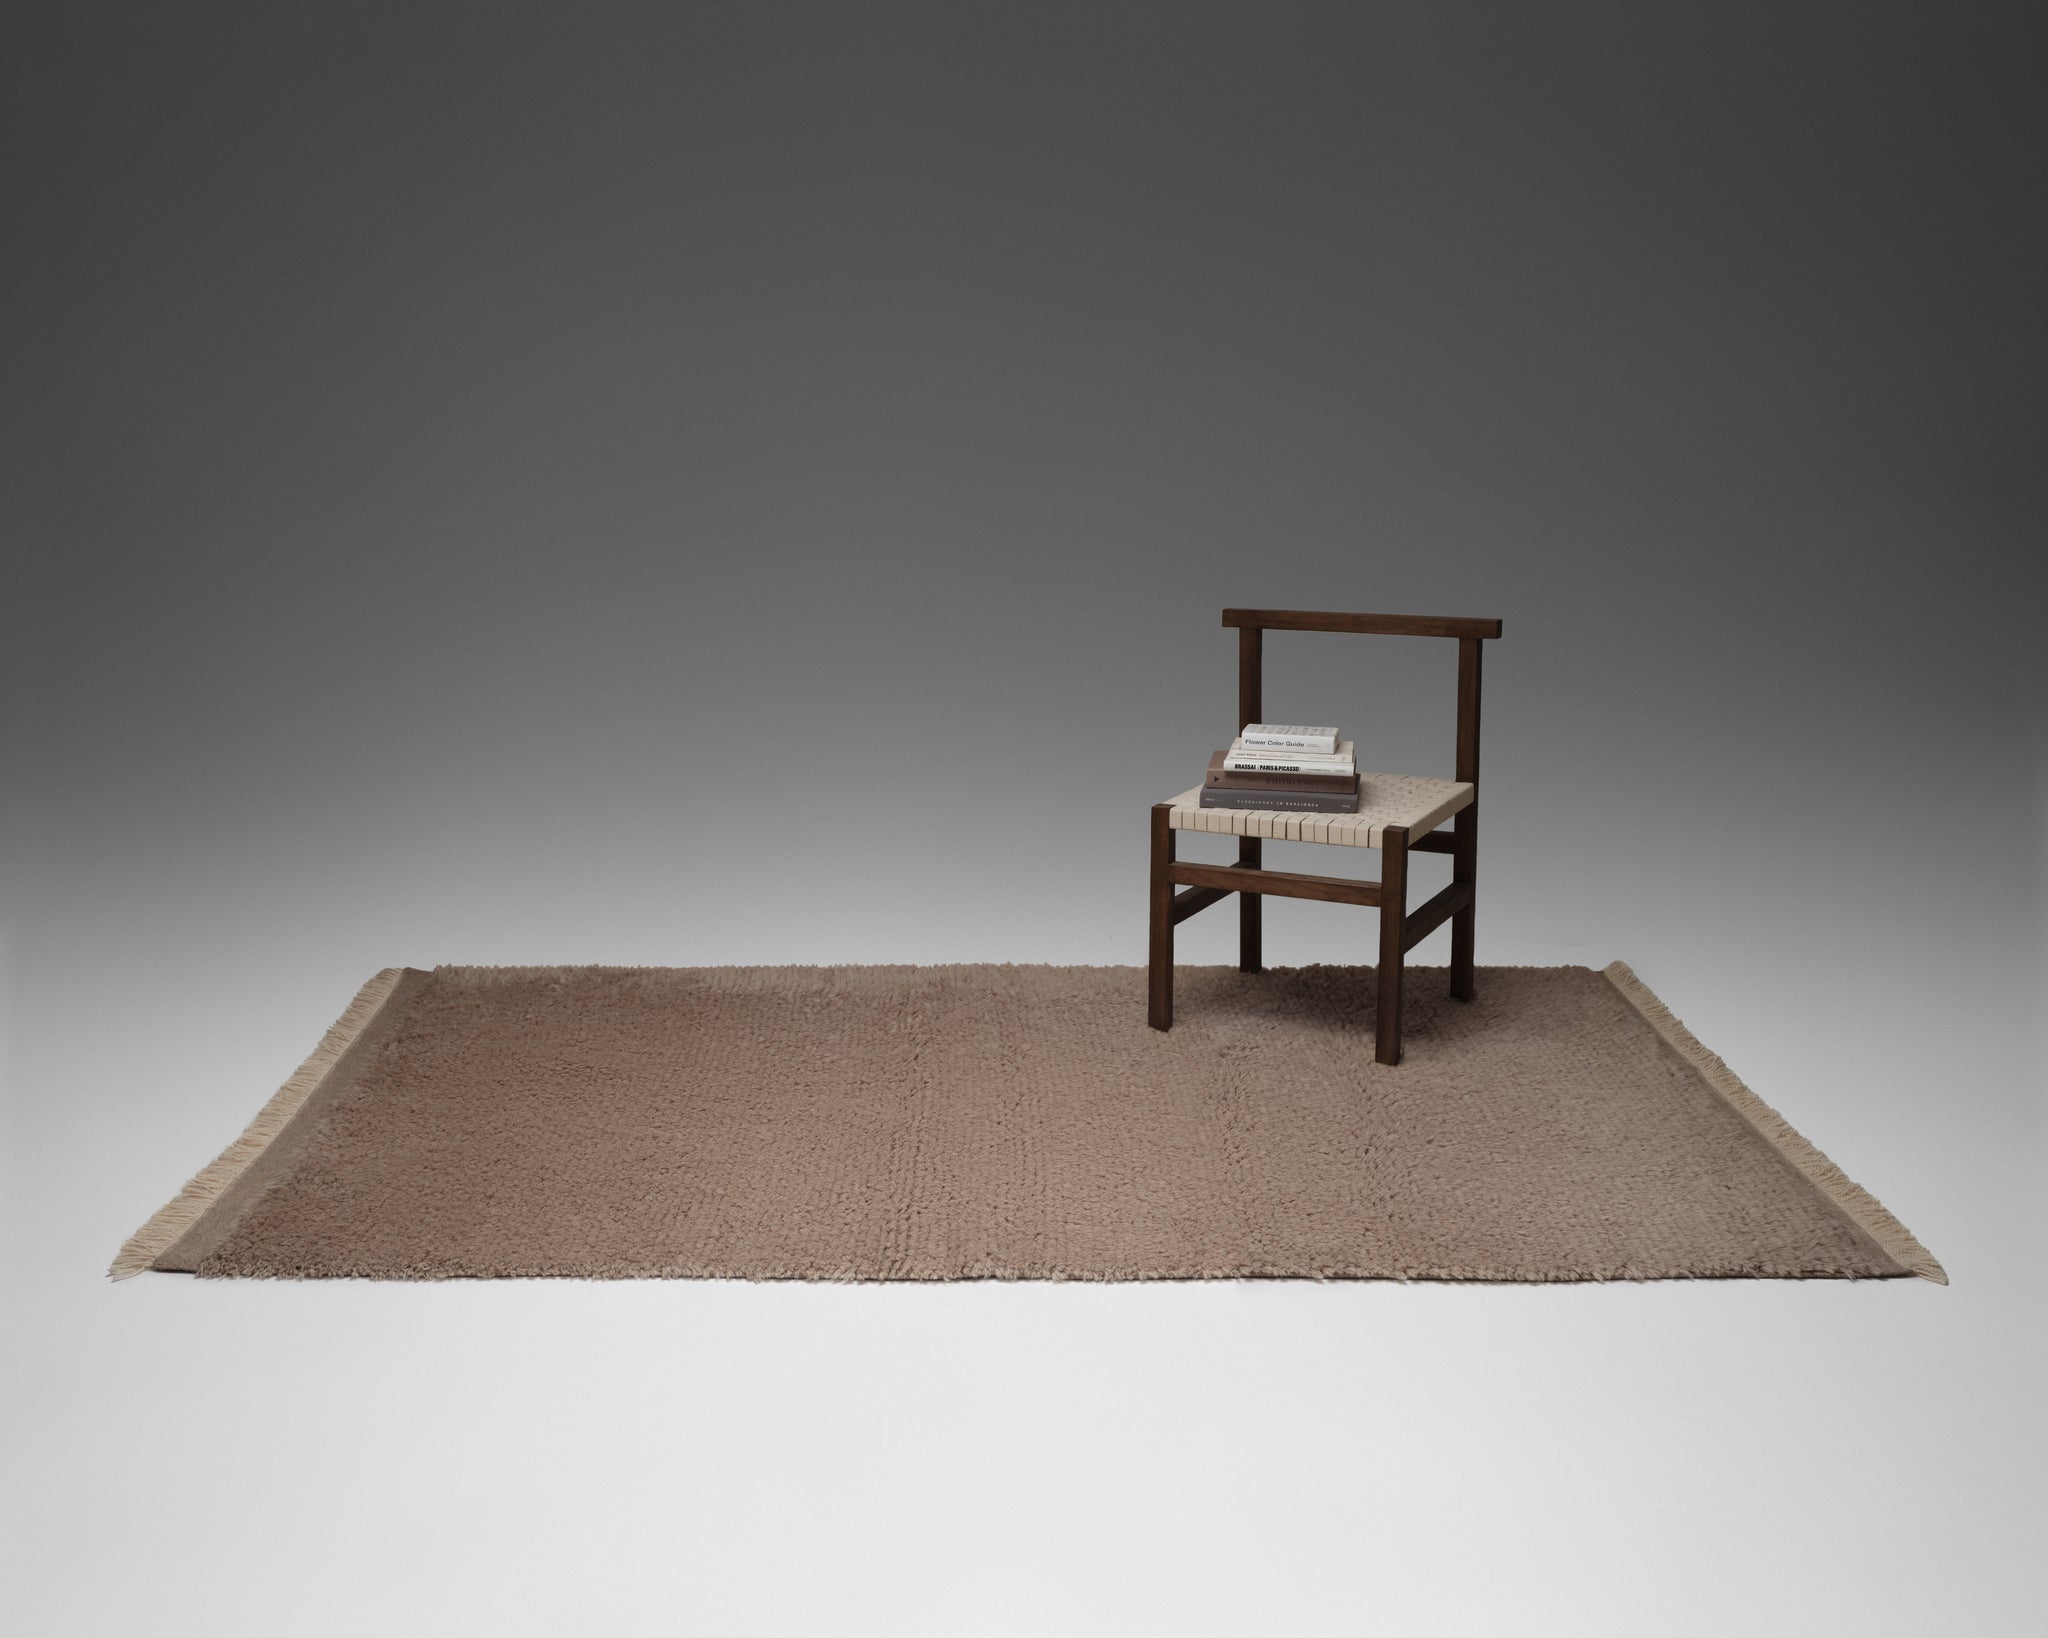 The Woolly Shag Rug - Short Pile, Taupe